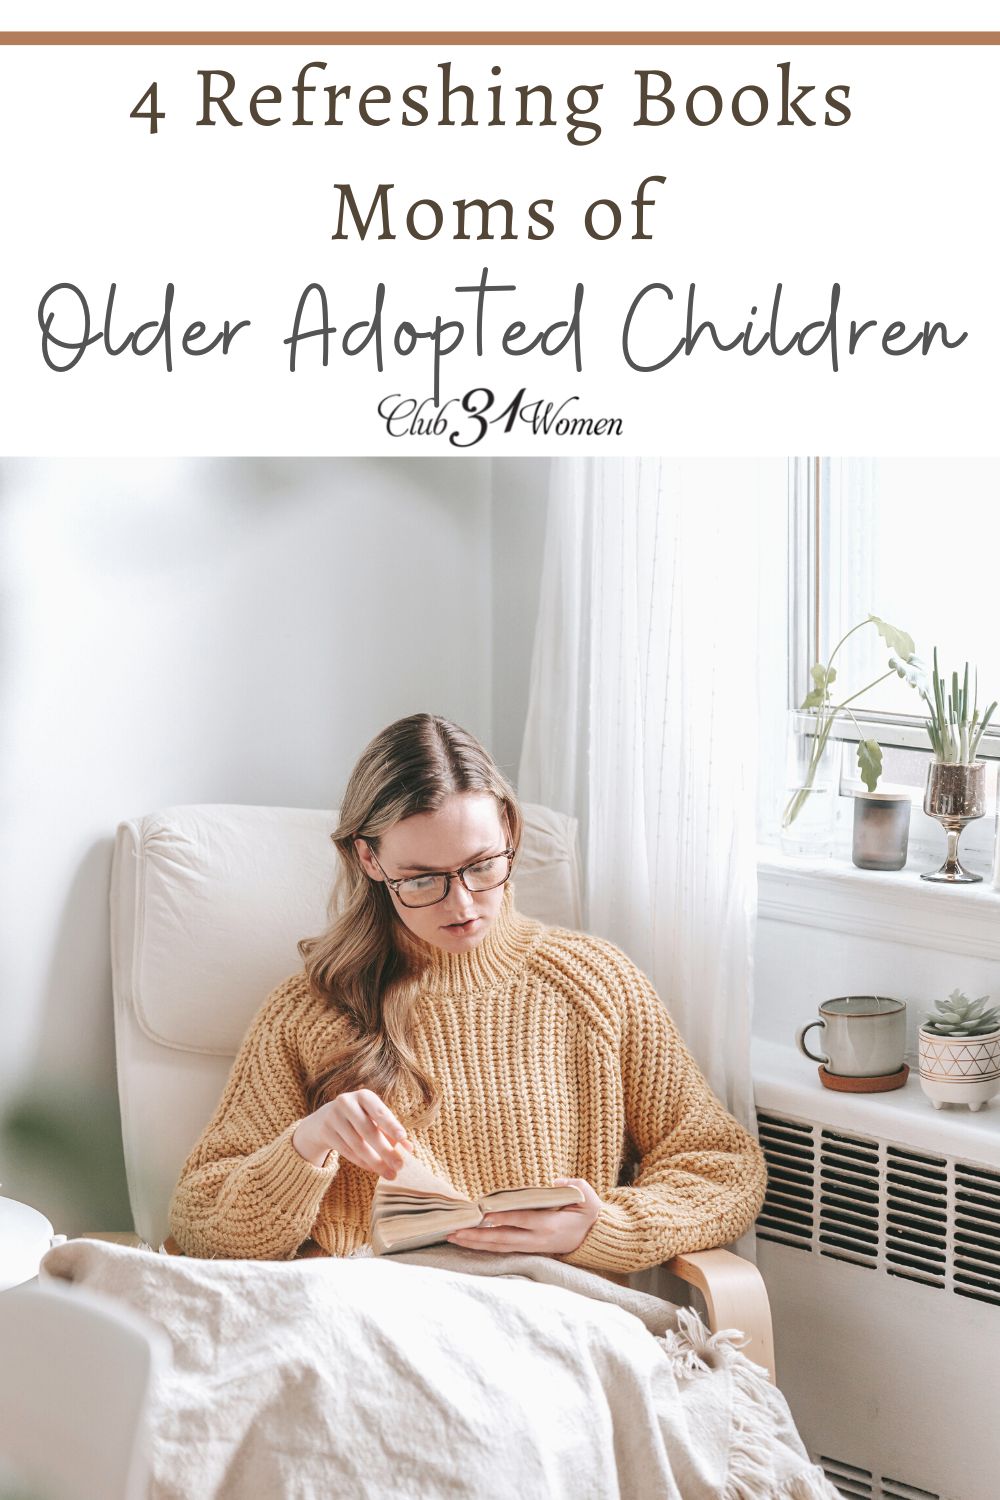 If you're the parent of older, adopted children, this list of amazing books, hand-picked just for you, may be the refreshing you need! via @Club31Women